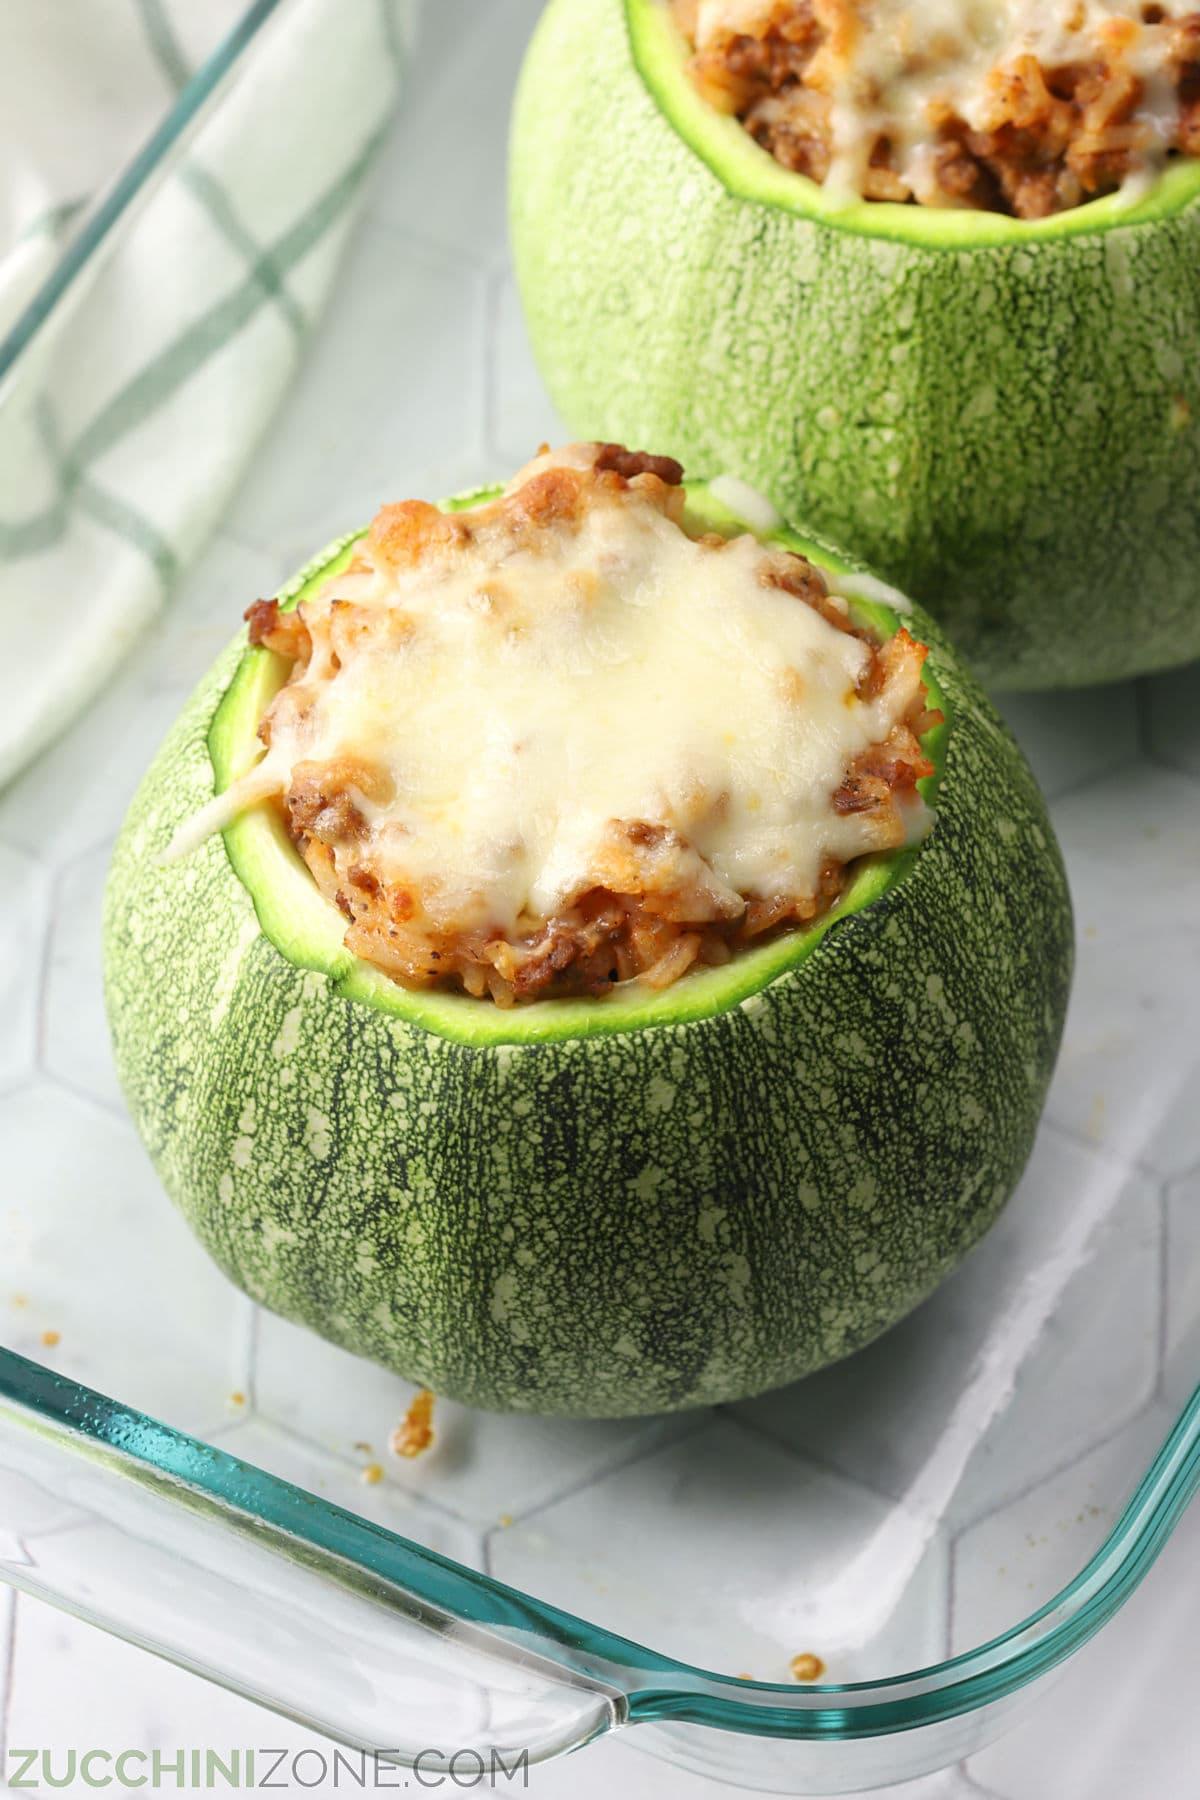 Two stuffed round zucchini with melted cheese on top in a casserole dish.